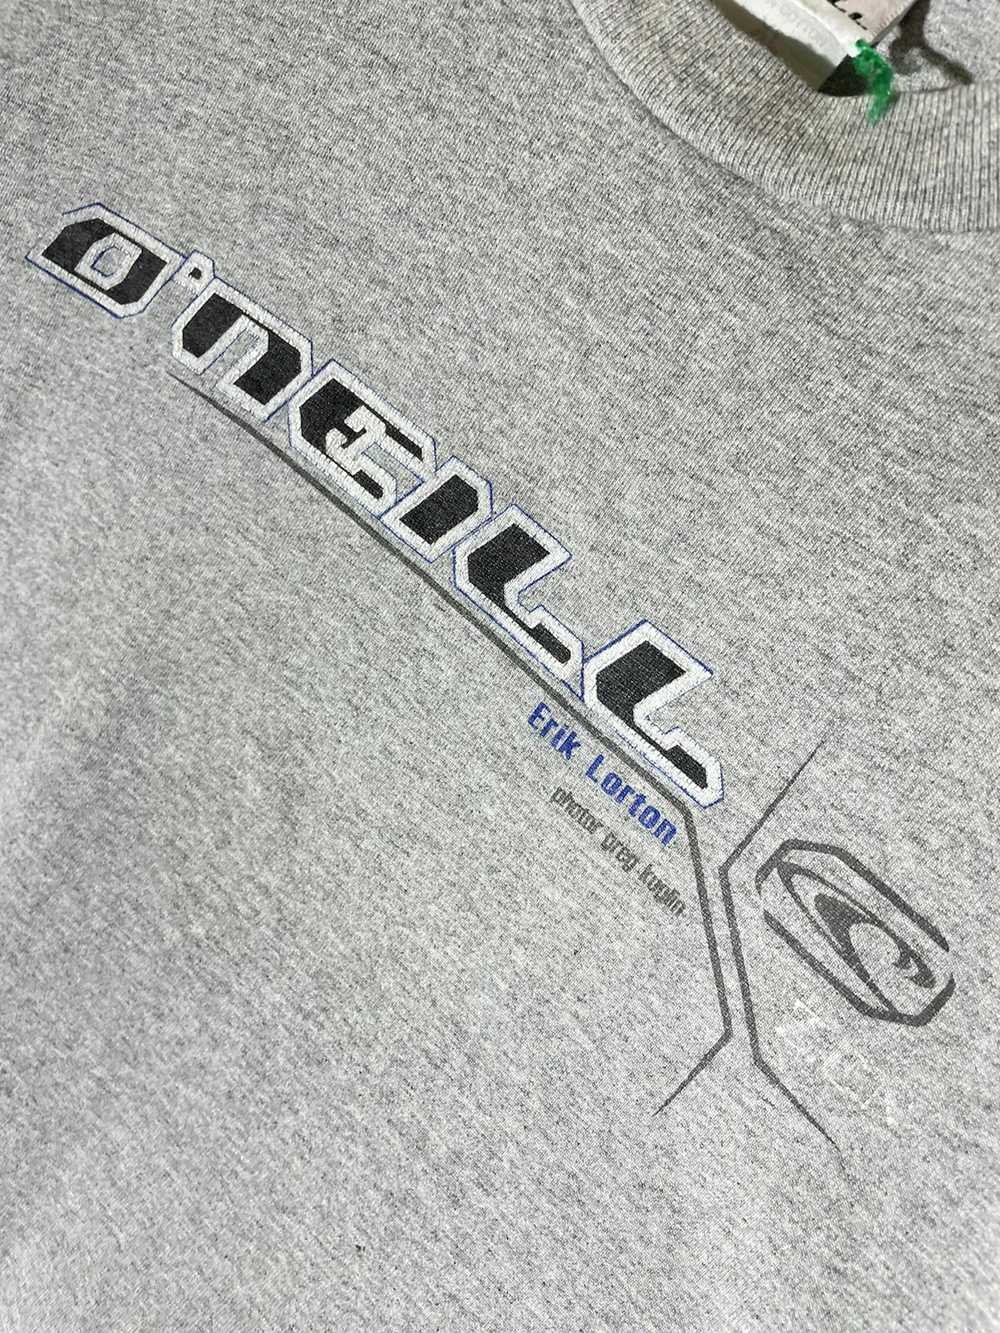 Oneill × Surf Style × Vintage O’Neill vintage sur… - image 10